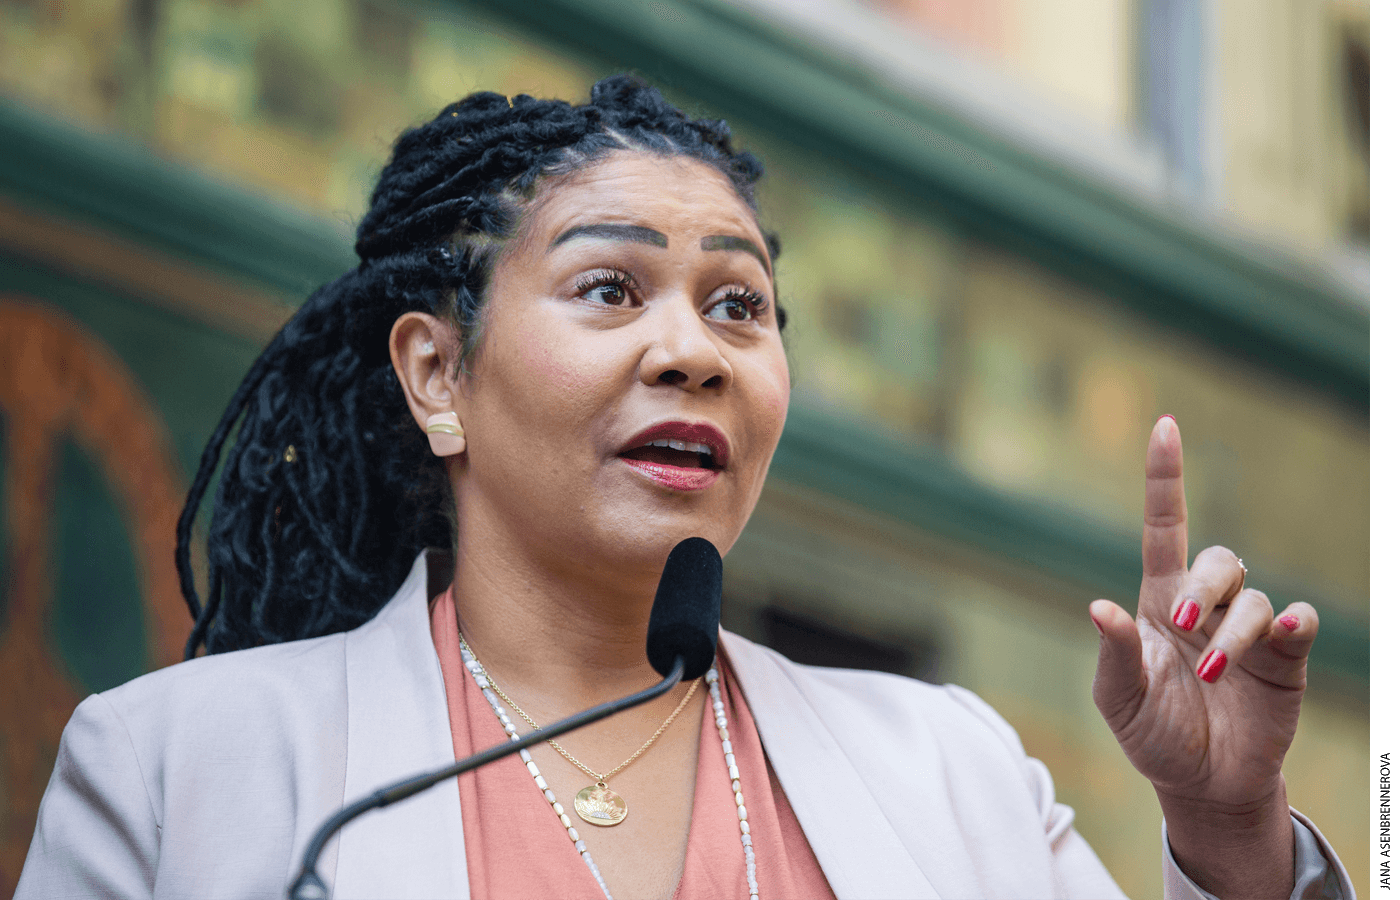 Mayor London Breed, who strongly endorsed the recall, said that the San Francisco school board “must focus on the essentials of delivering a well-run school system above all else.”